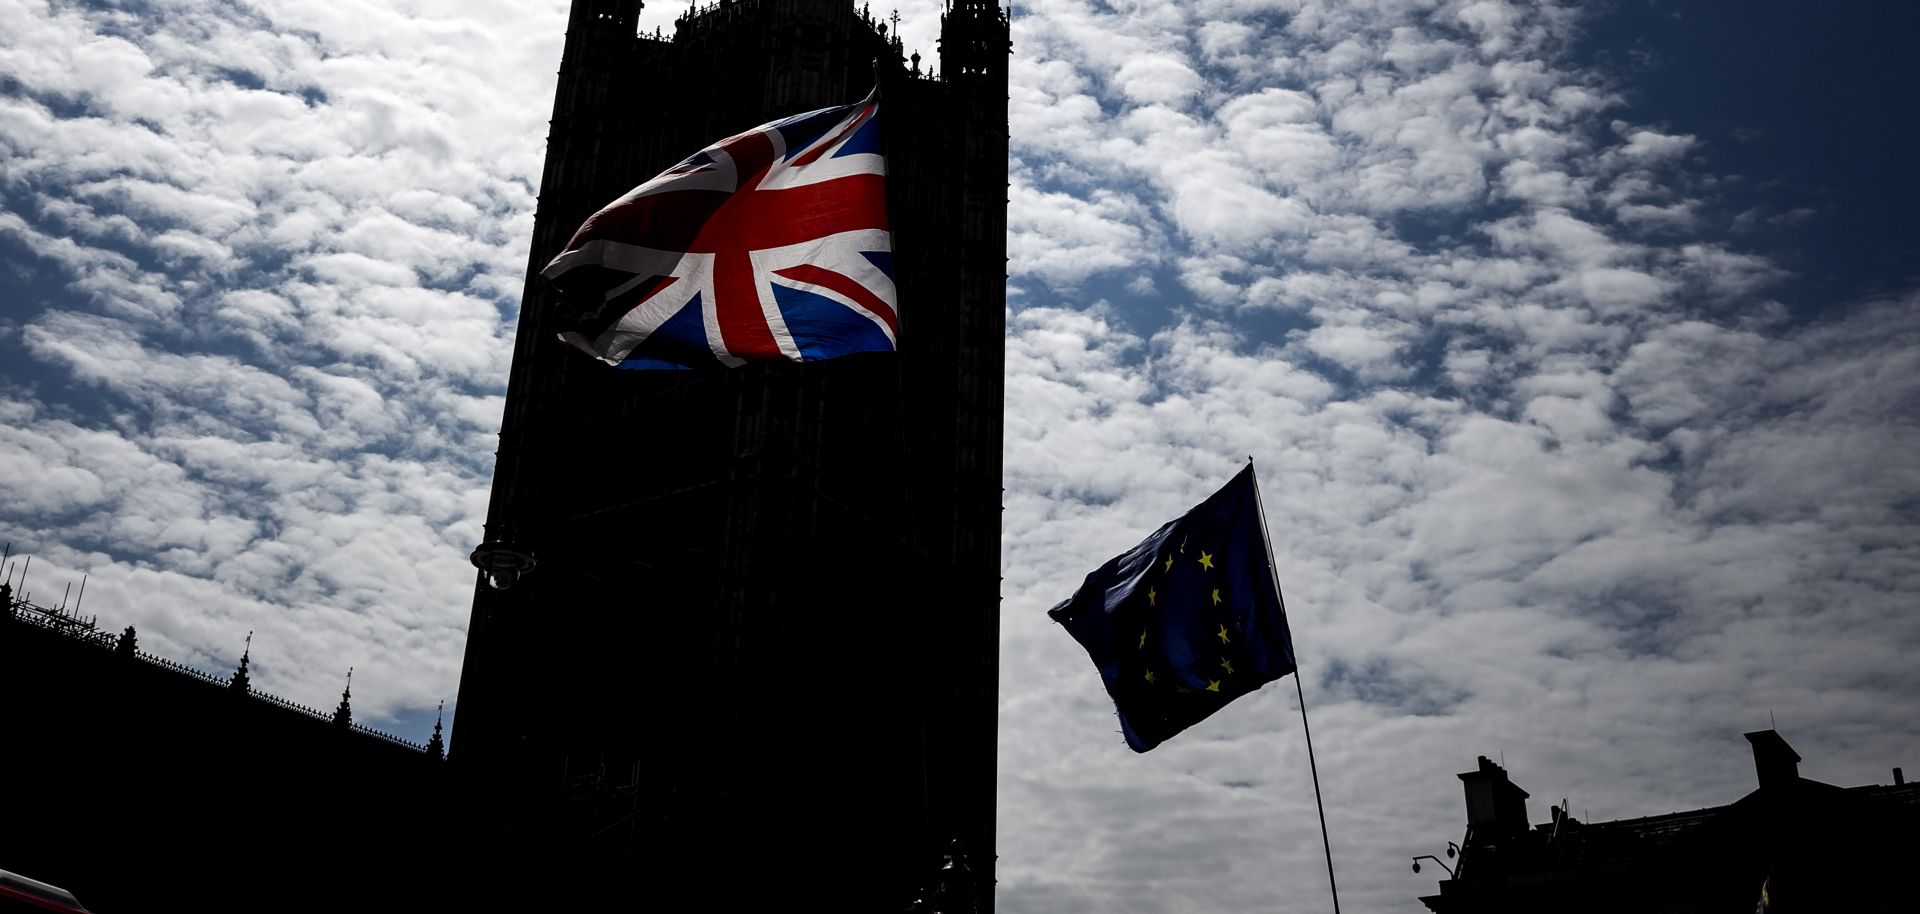 A Union Flag waves outside the Houses of Parliament in London on July 12, 2019.